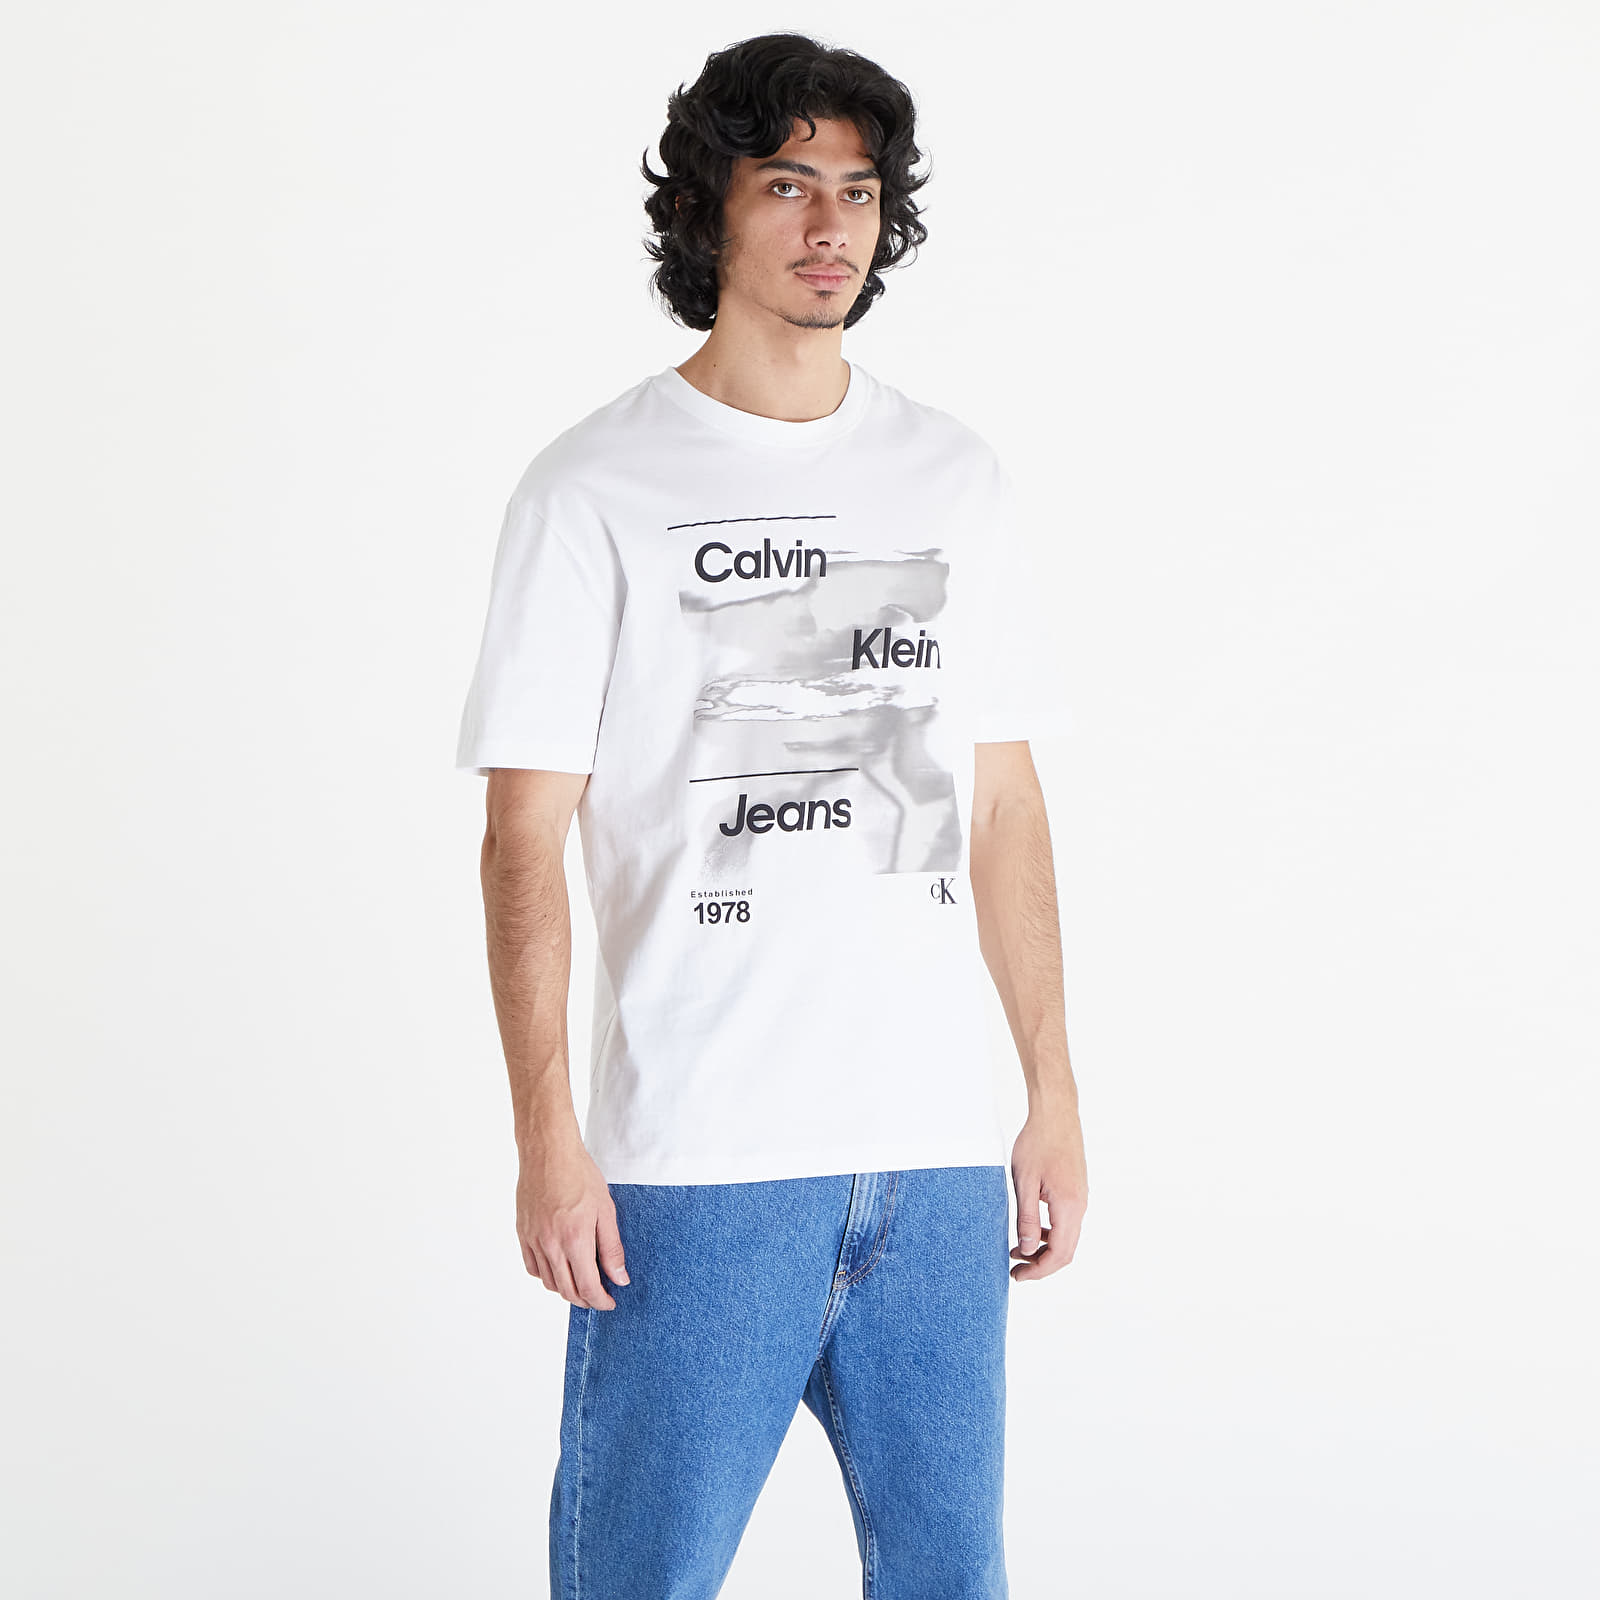 Tee Klein Diffused Jeans | Logo T-shirts Bright Sleeve Queens White Short Calvin